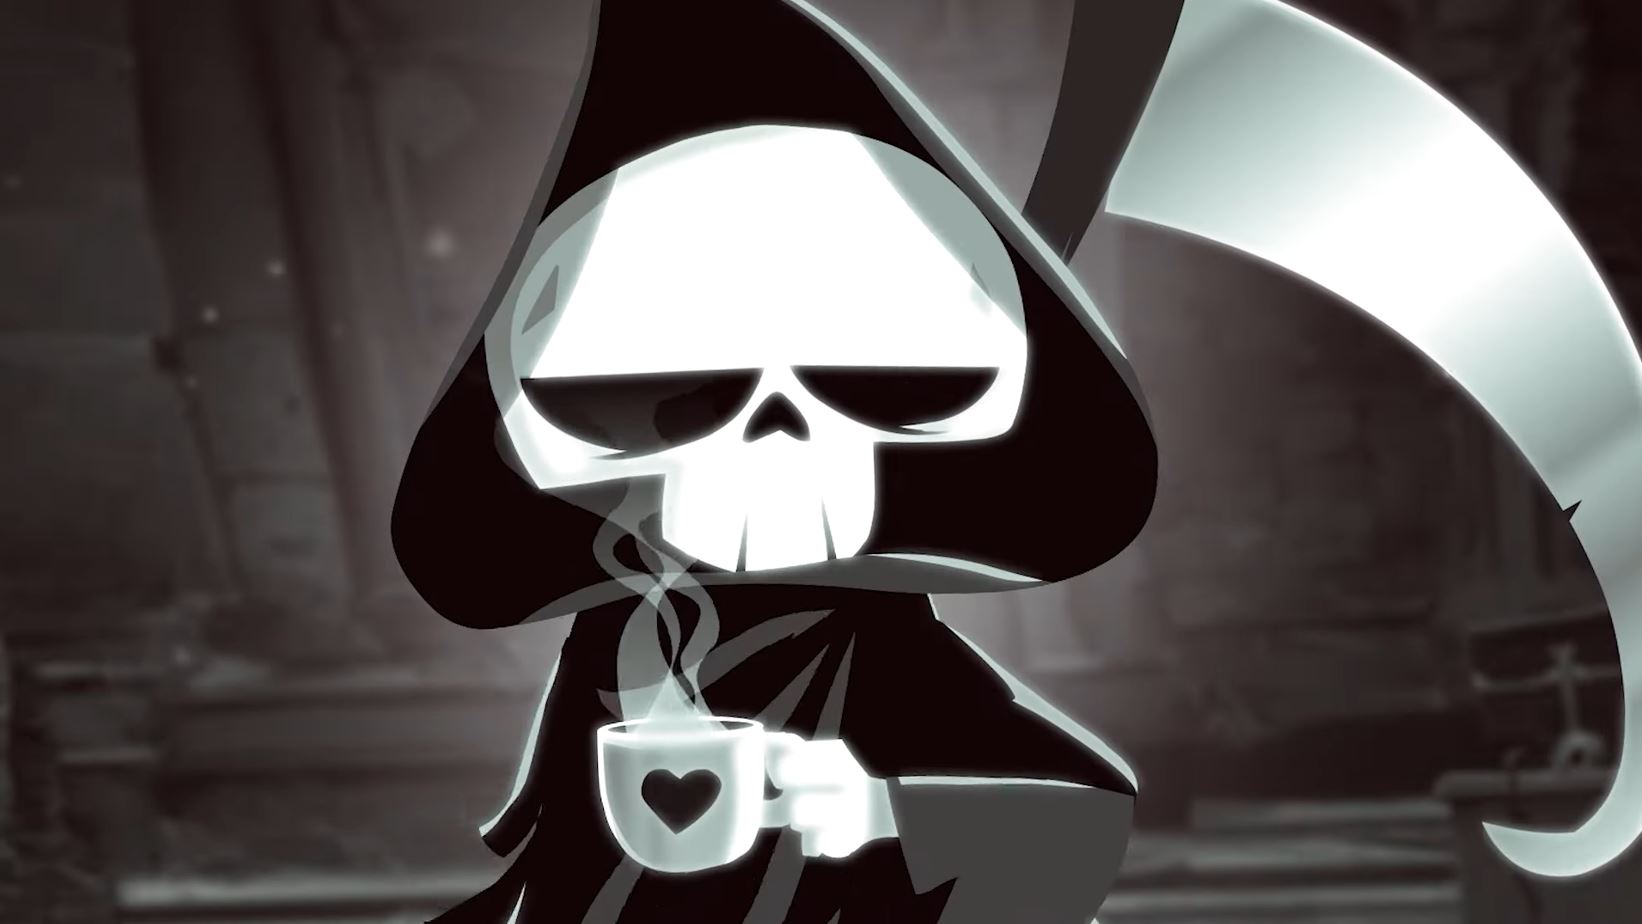 The Grim reaper drinks coffee in Have a Nice Death.